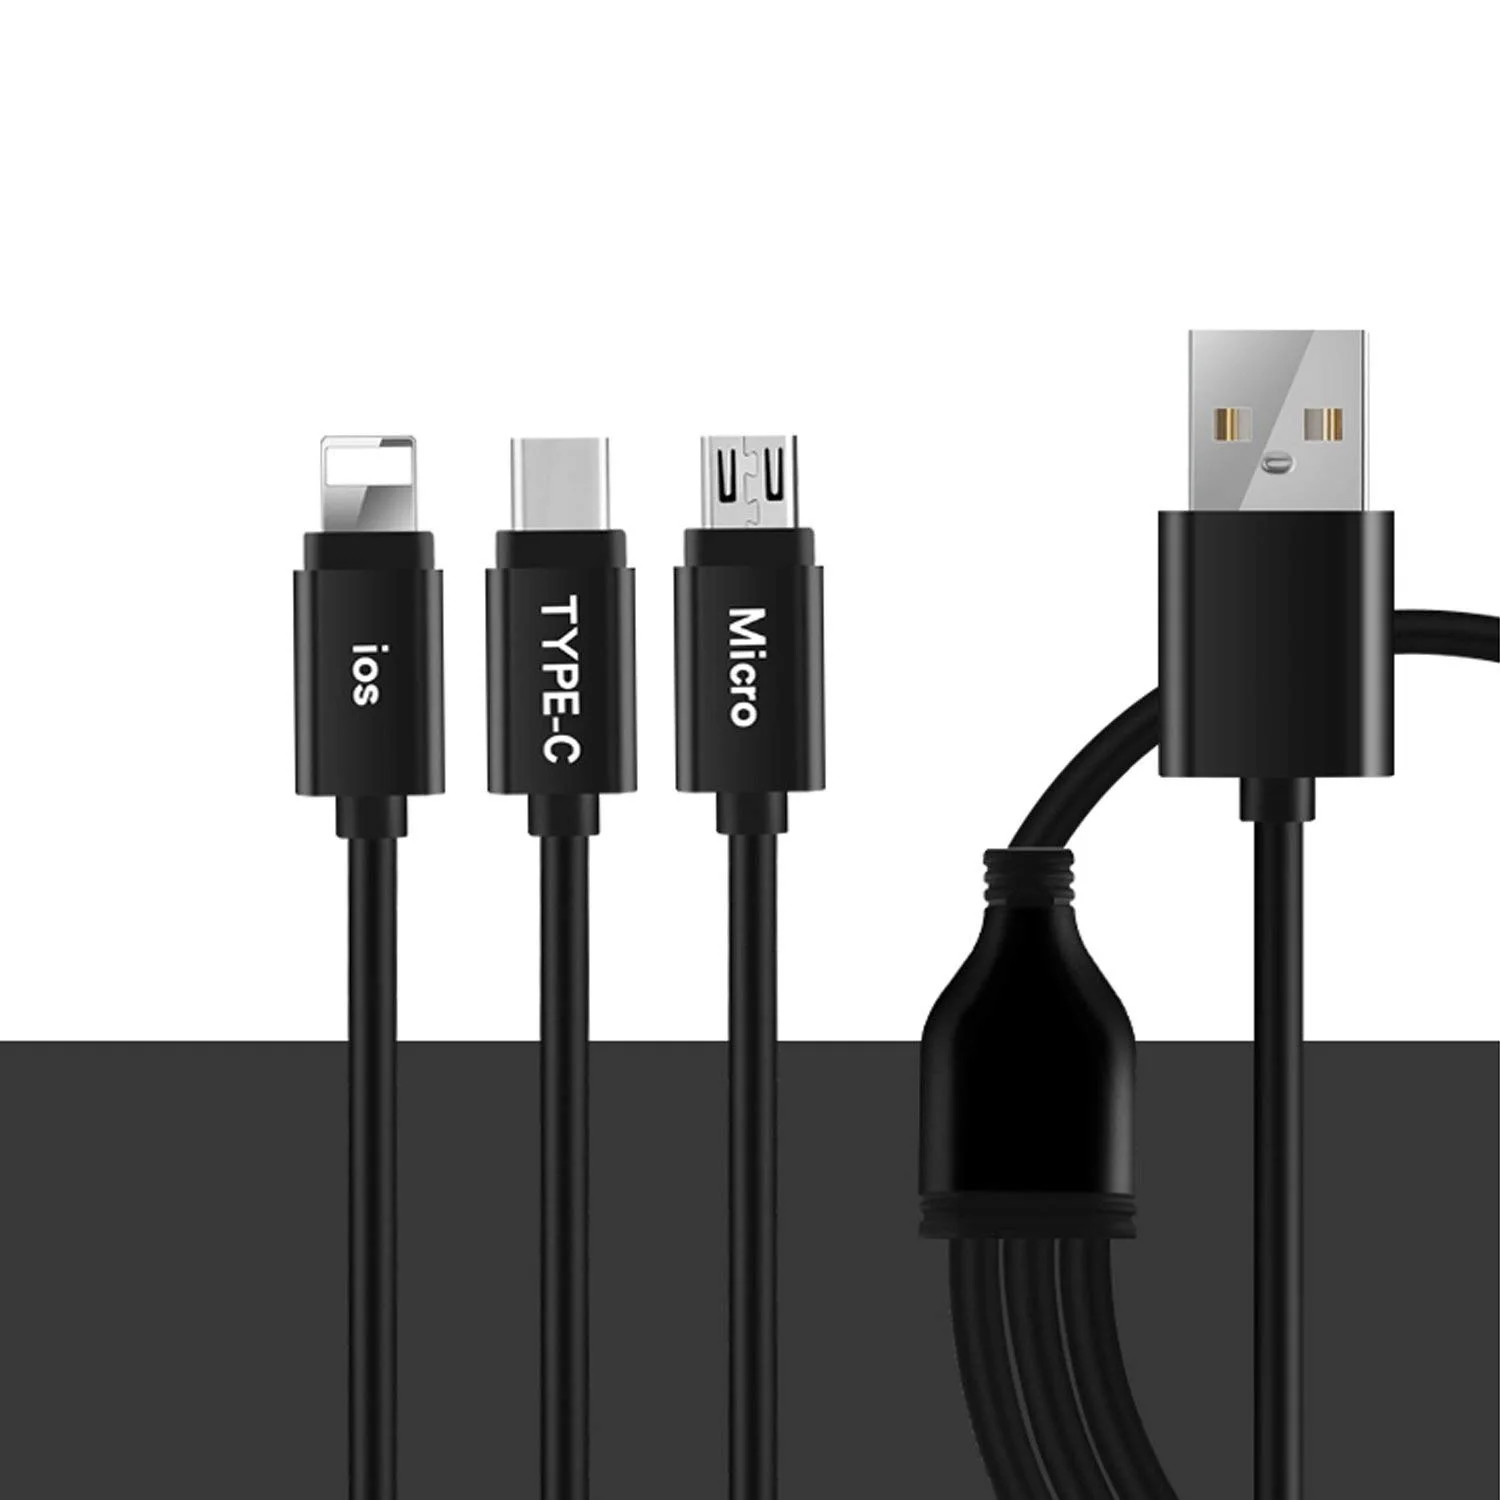 

Multi Charger Cable 1.2M 4FT TPE PVC Universal 3 in 1 Multiple USB Charging Cable, Black/white